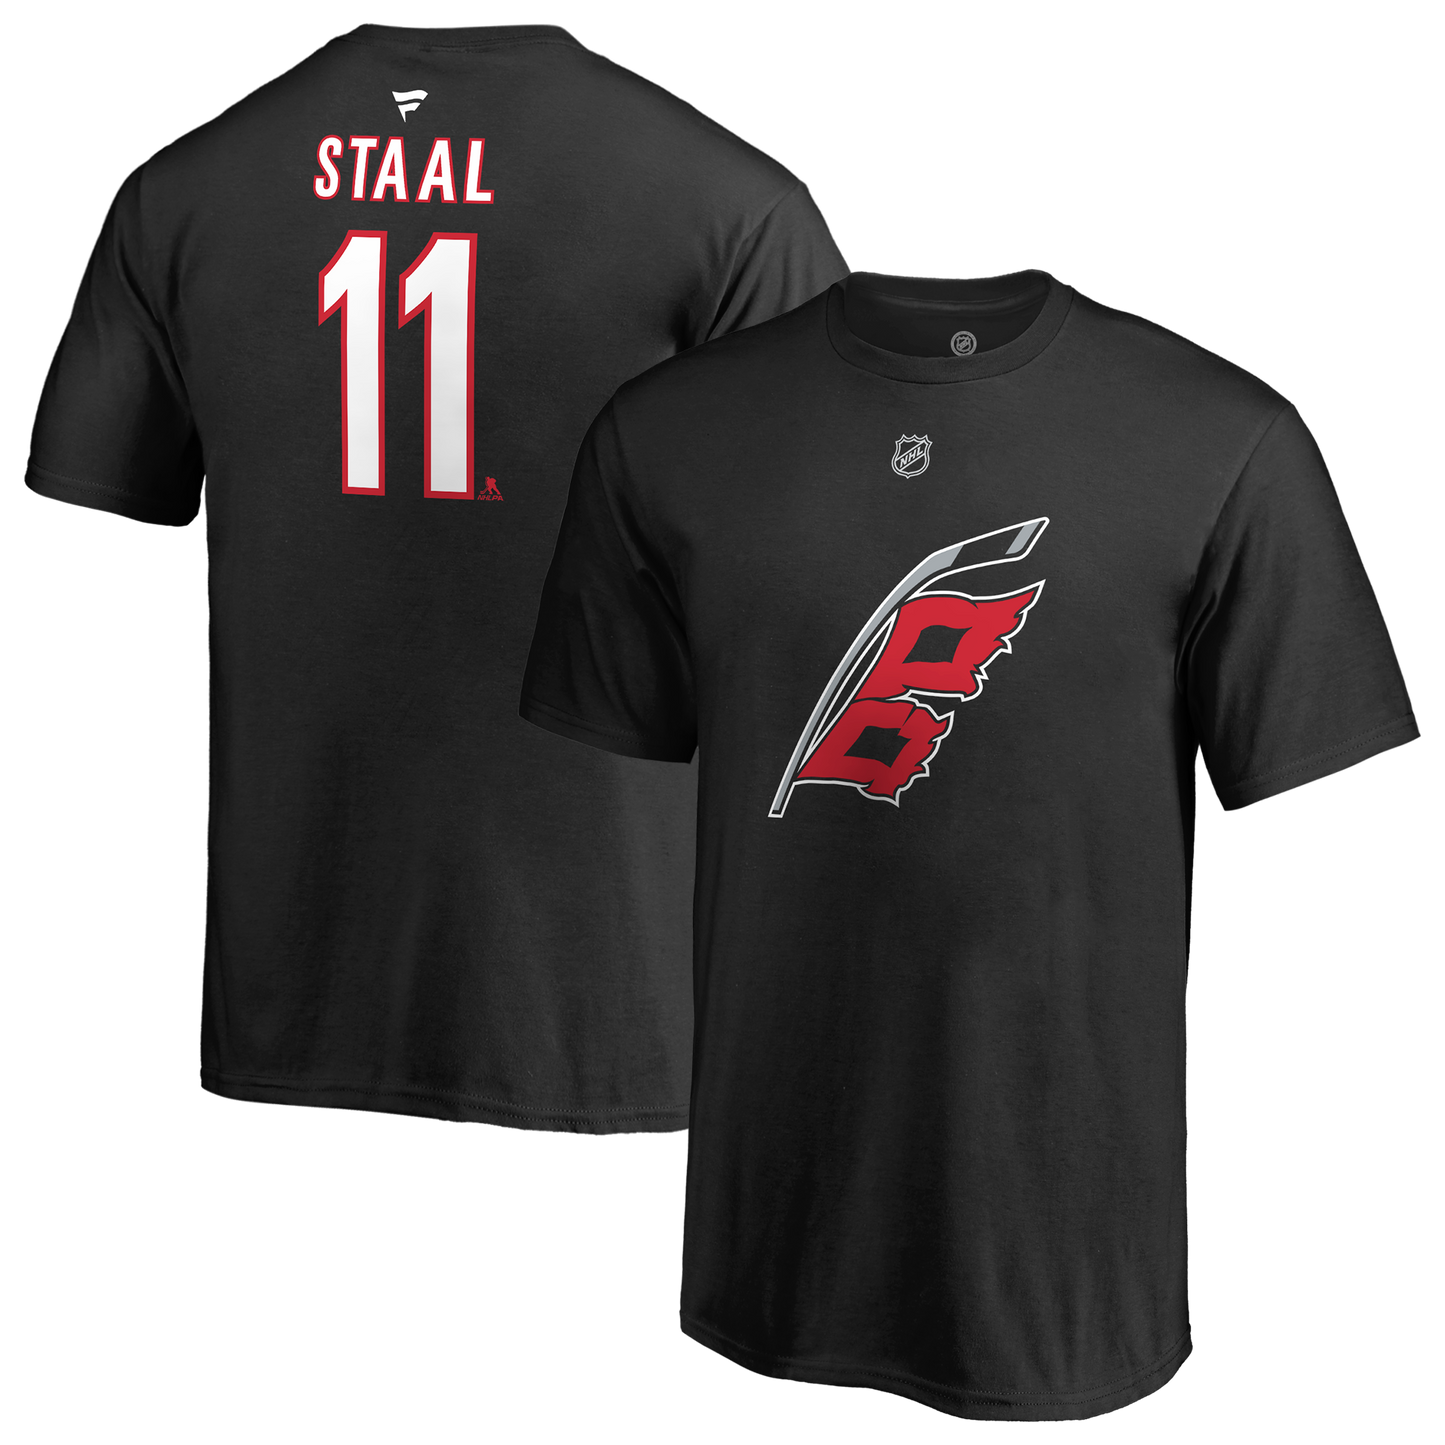 NHL Shop - Featuring a new alternate logo, the Canes third jersey